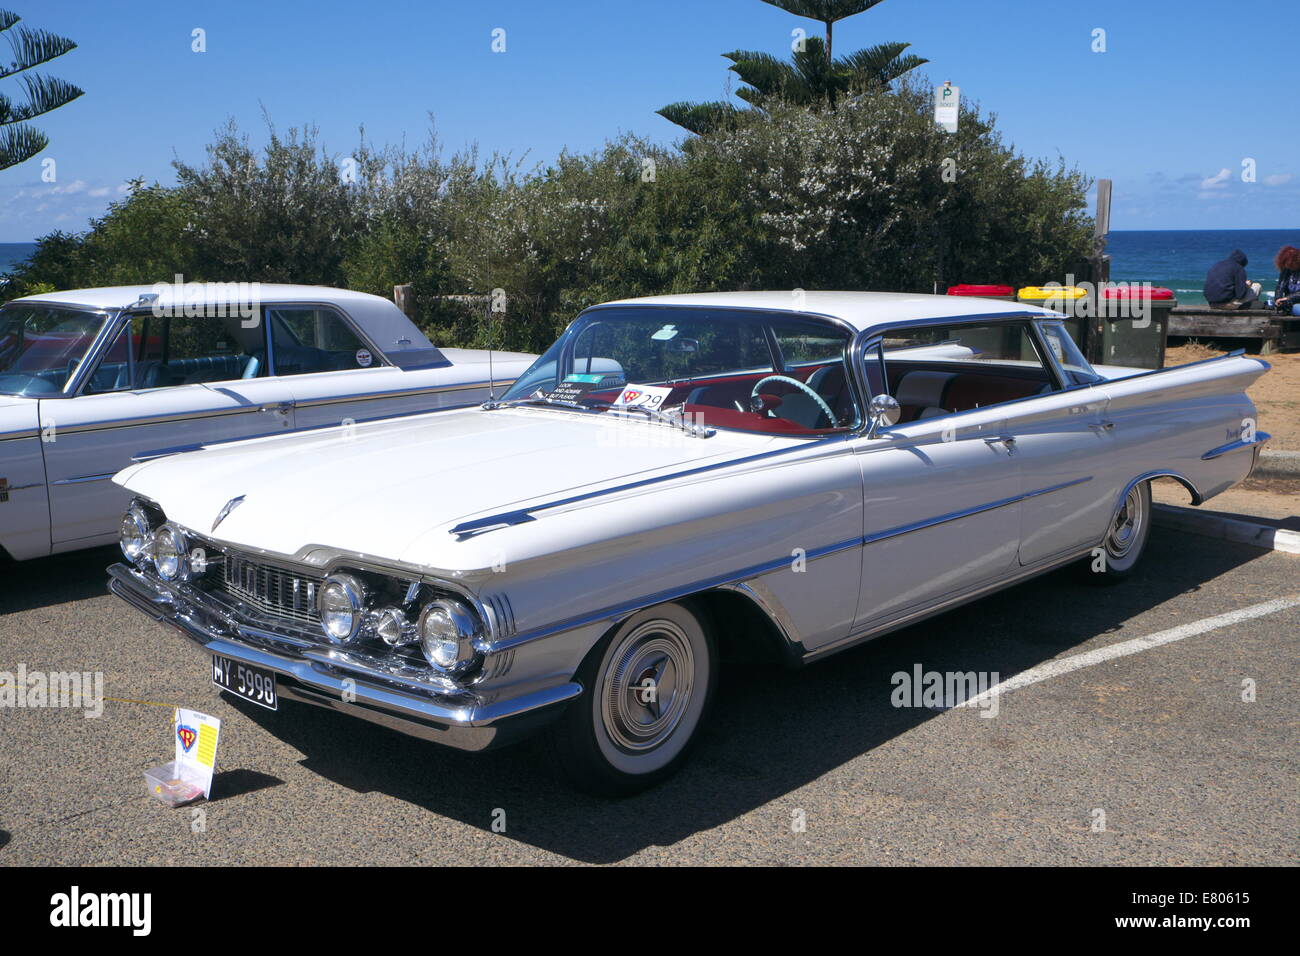 Newport Beach, Sydney, Australia. 27th Sep, 2014. Classic cars on display at Sydney's Newport Beach, white oldsmobile featured. Credit:  martin berry/Alamy Live News Stock Photo